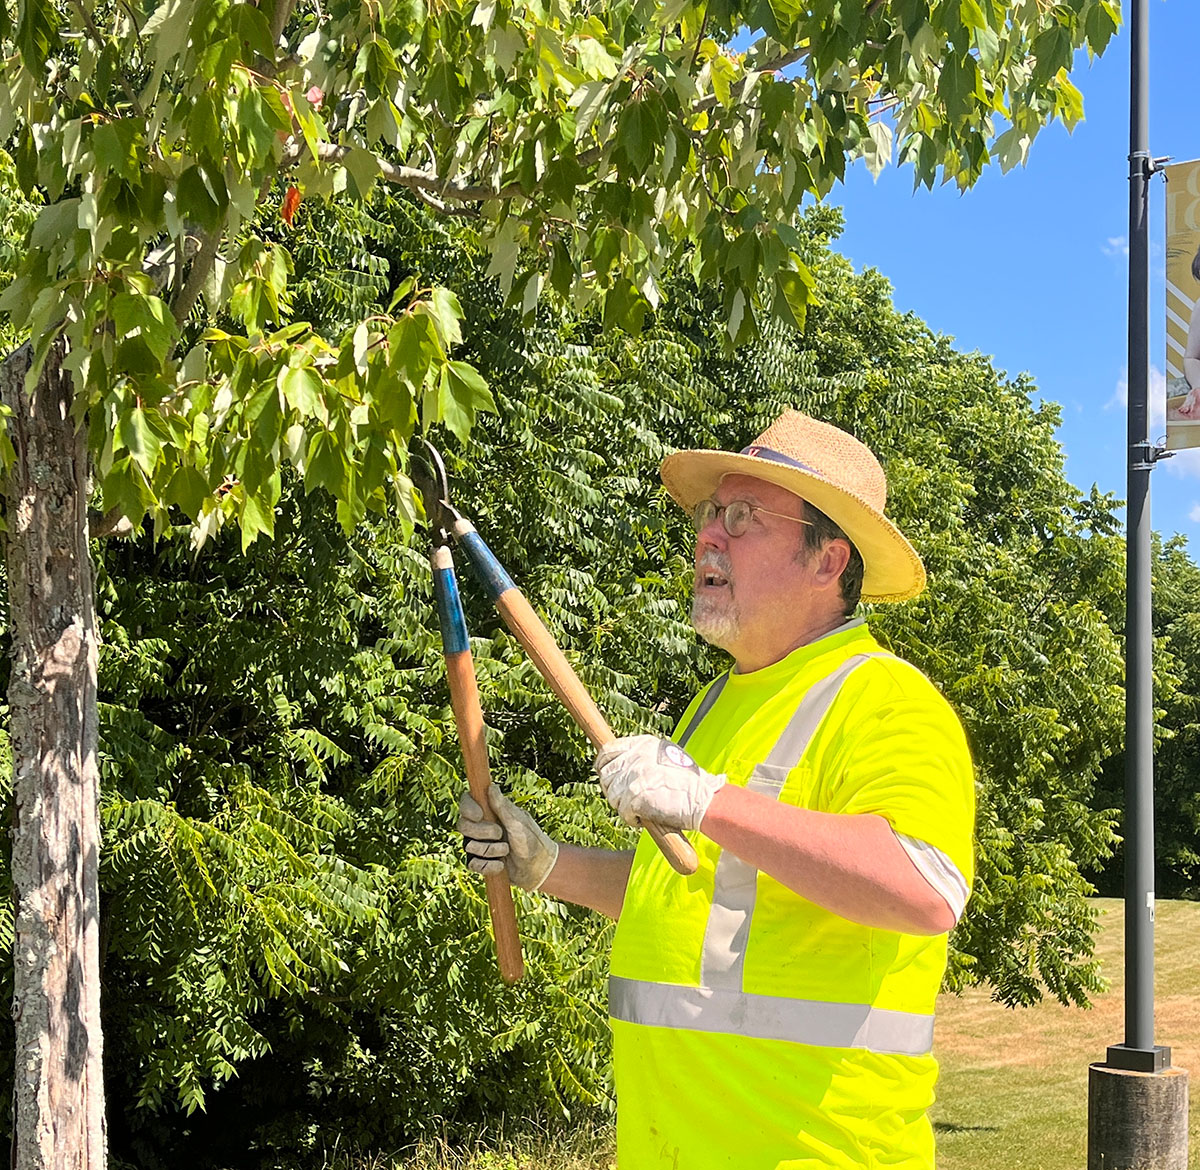 Professor tends to red maple trees along Saint Vincent College’s driveway entrance